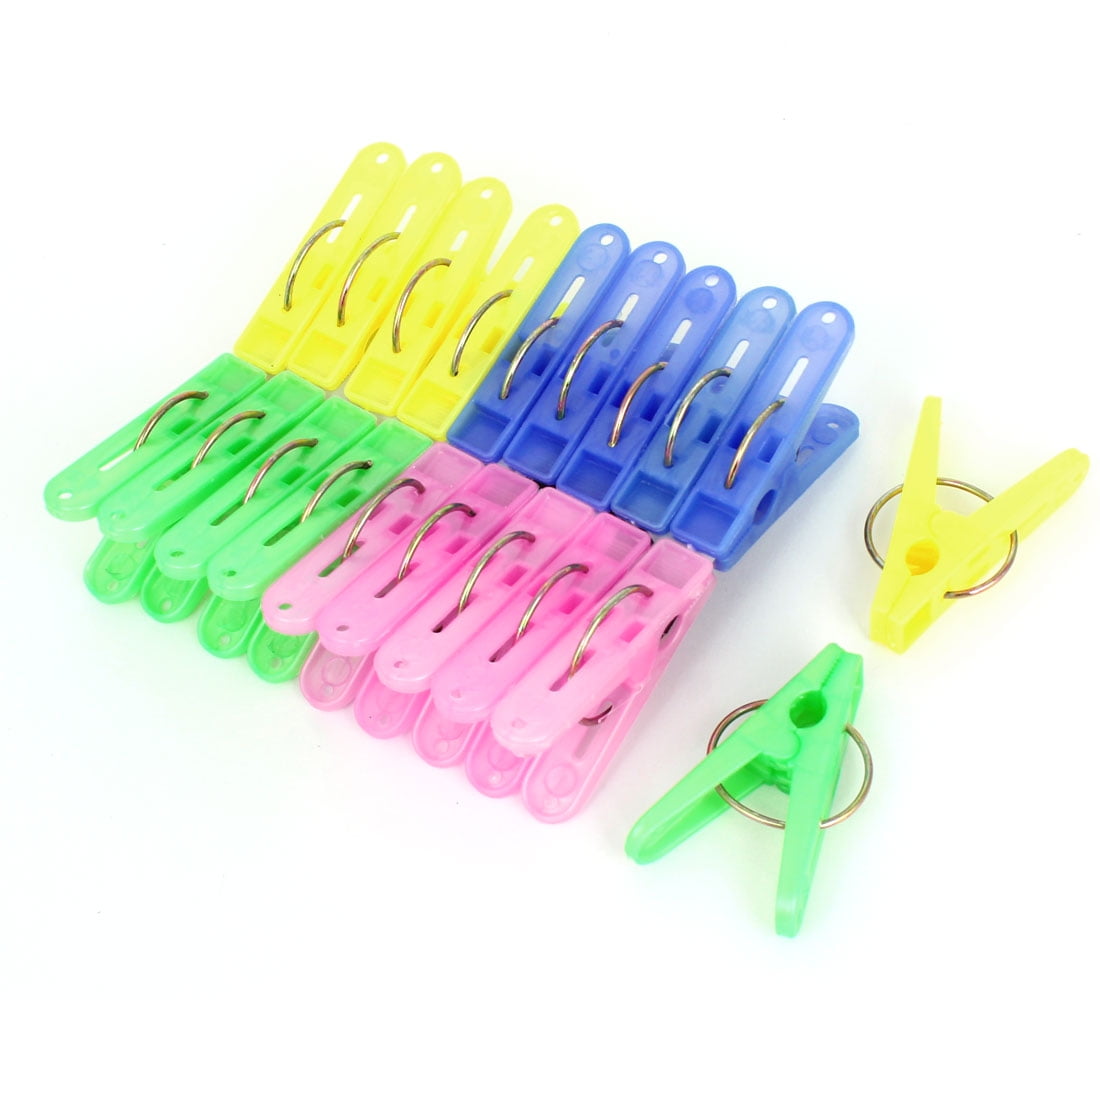 Multi Colour Laundry Pegs Soft Grip Clothes Pin Pack of 20/ Washing Line Pegs Laundry Clothes Clips for Home,Medium Size ARVO Clothes Pegs 